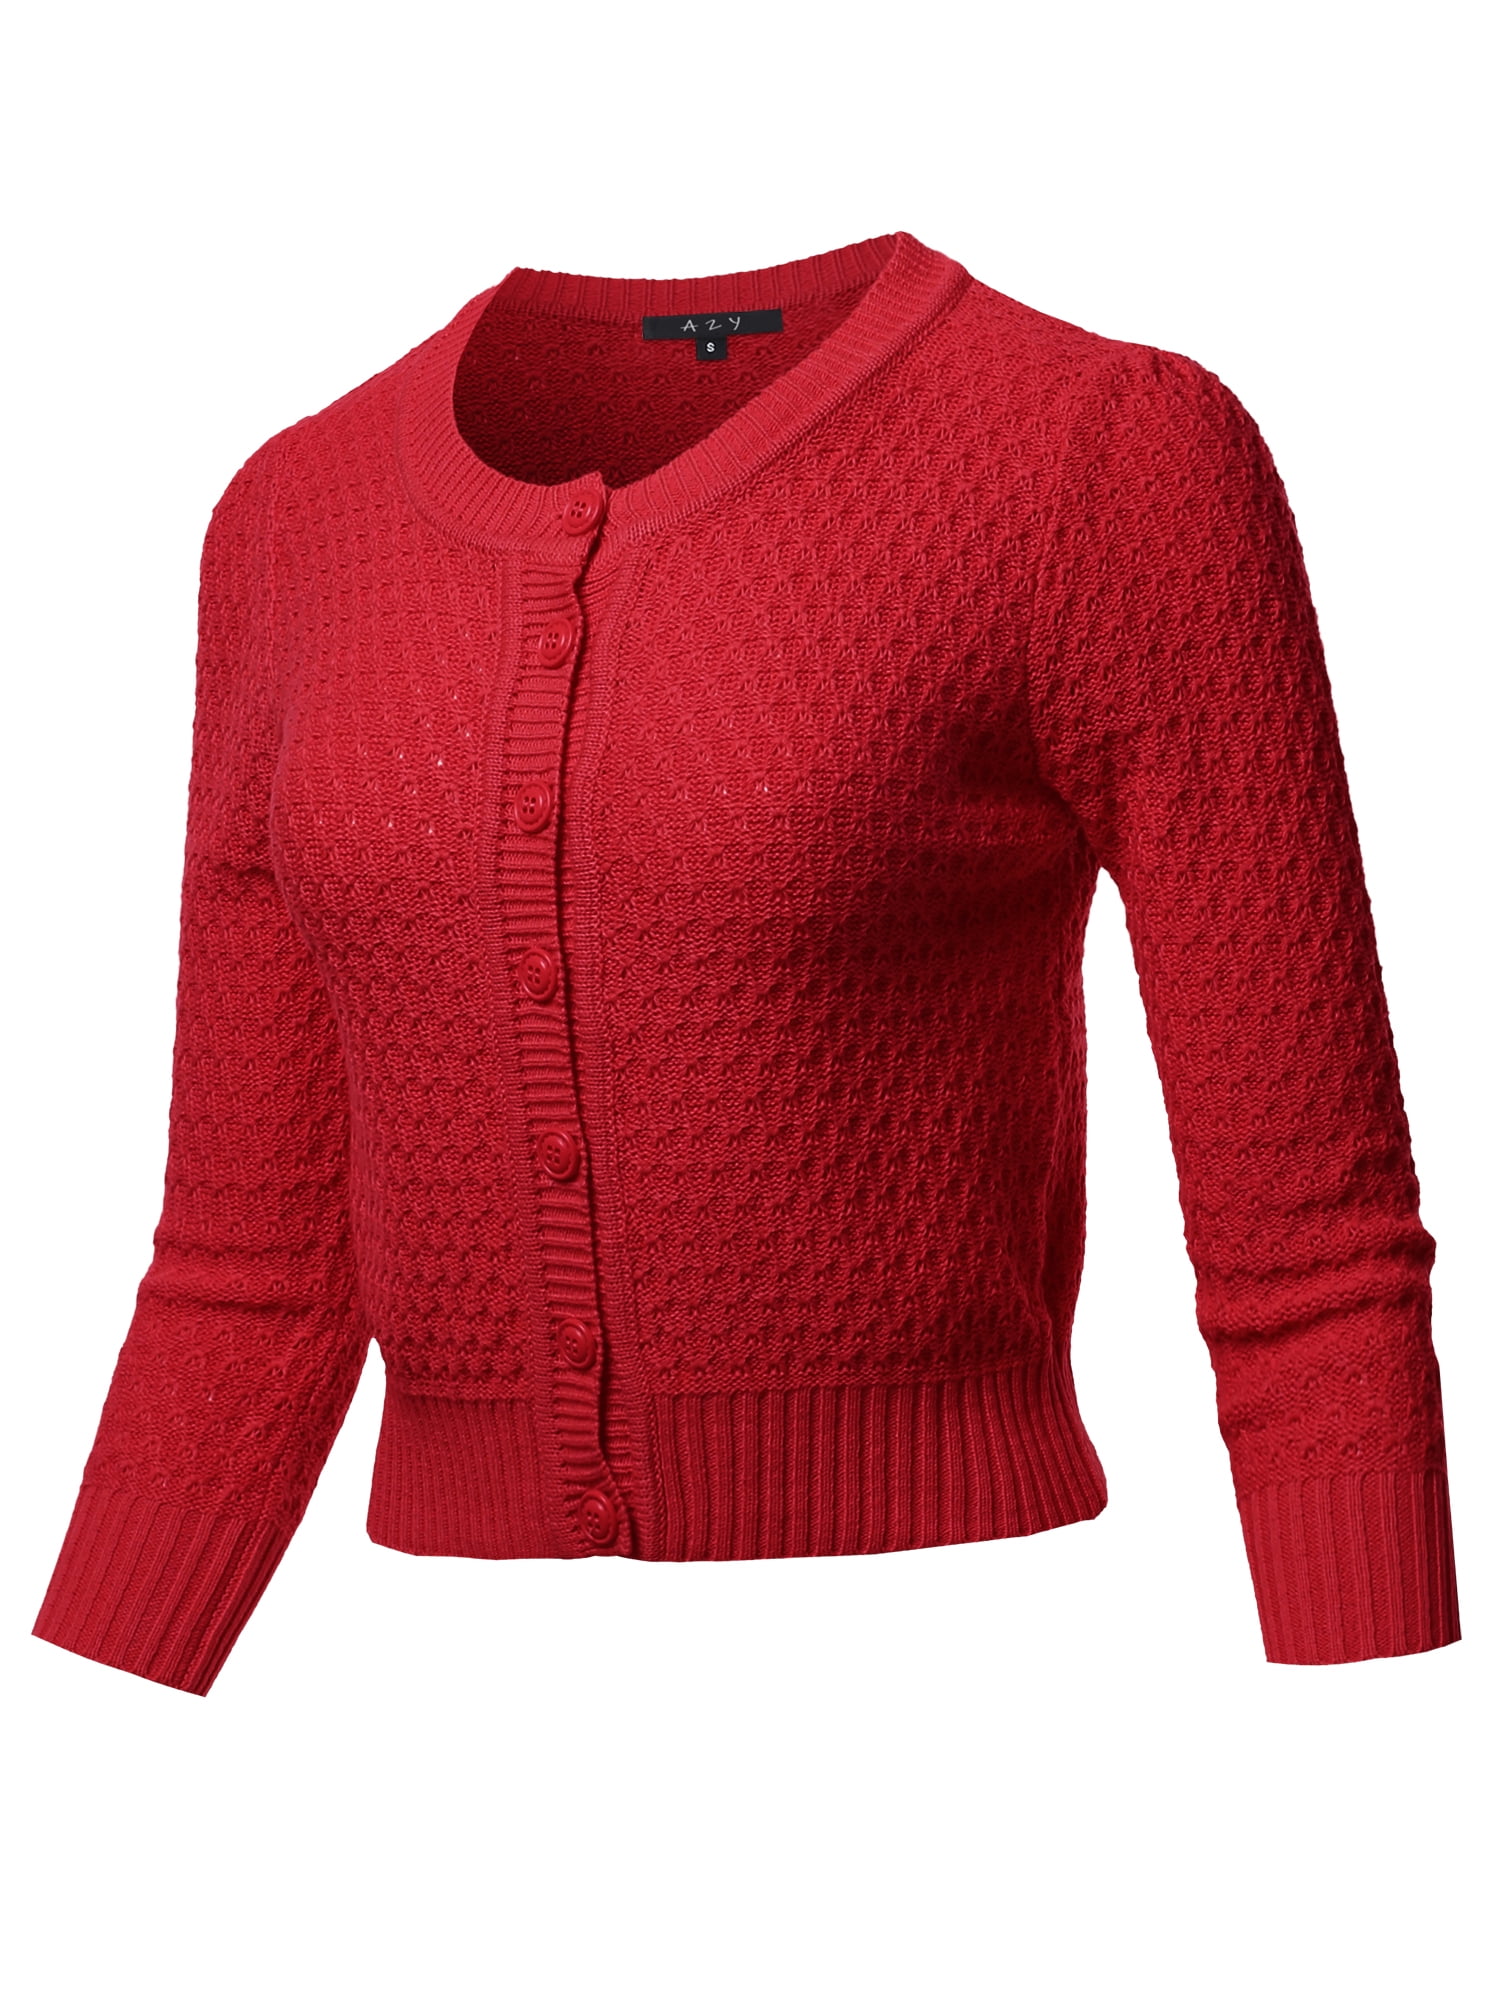 A2Y Women's Solid Cropped 3/4 Sleeve Button Down Crew Neck Knit ...